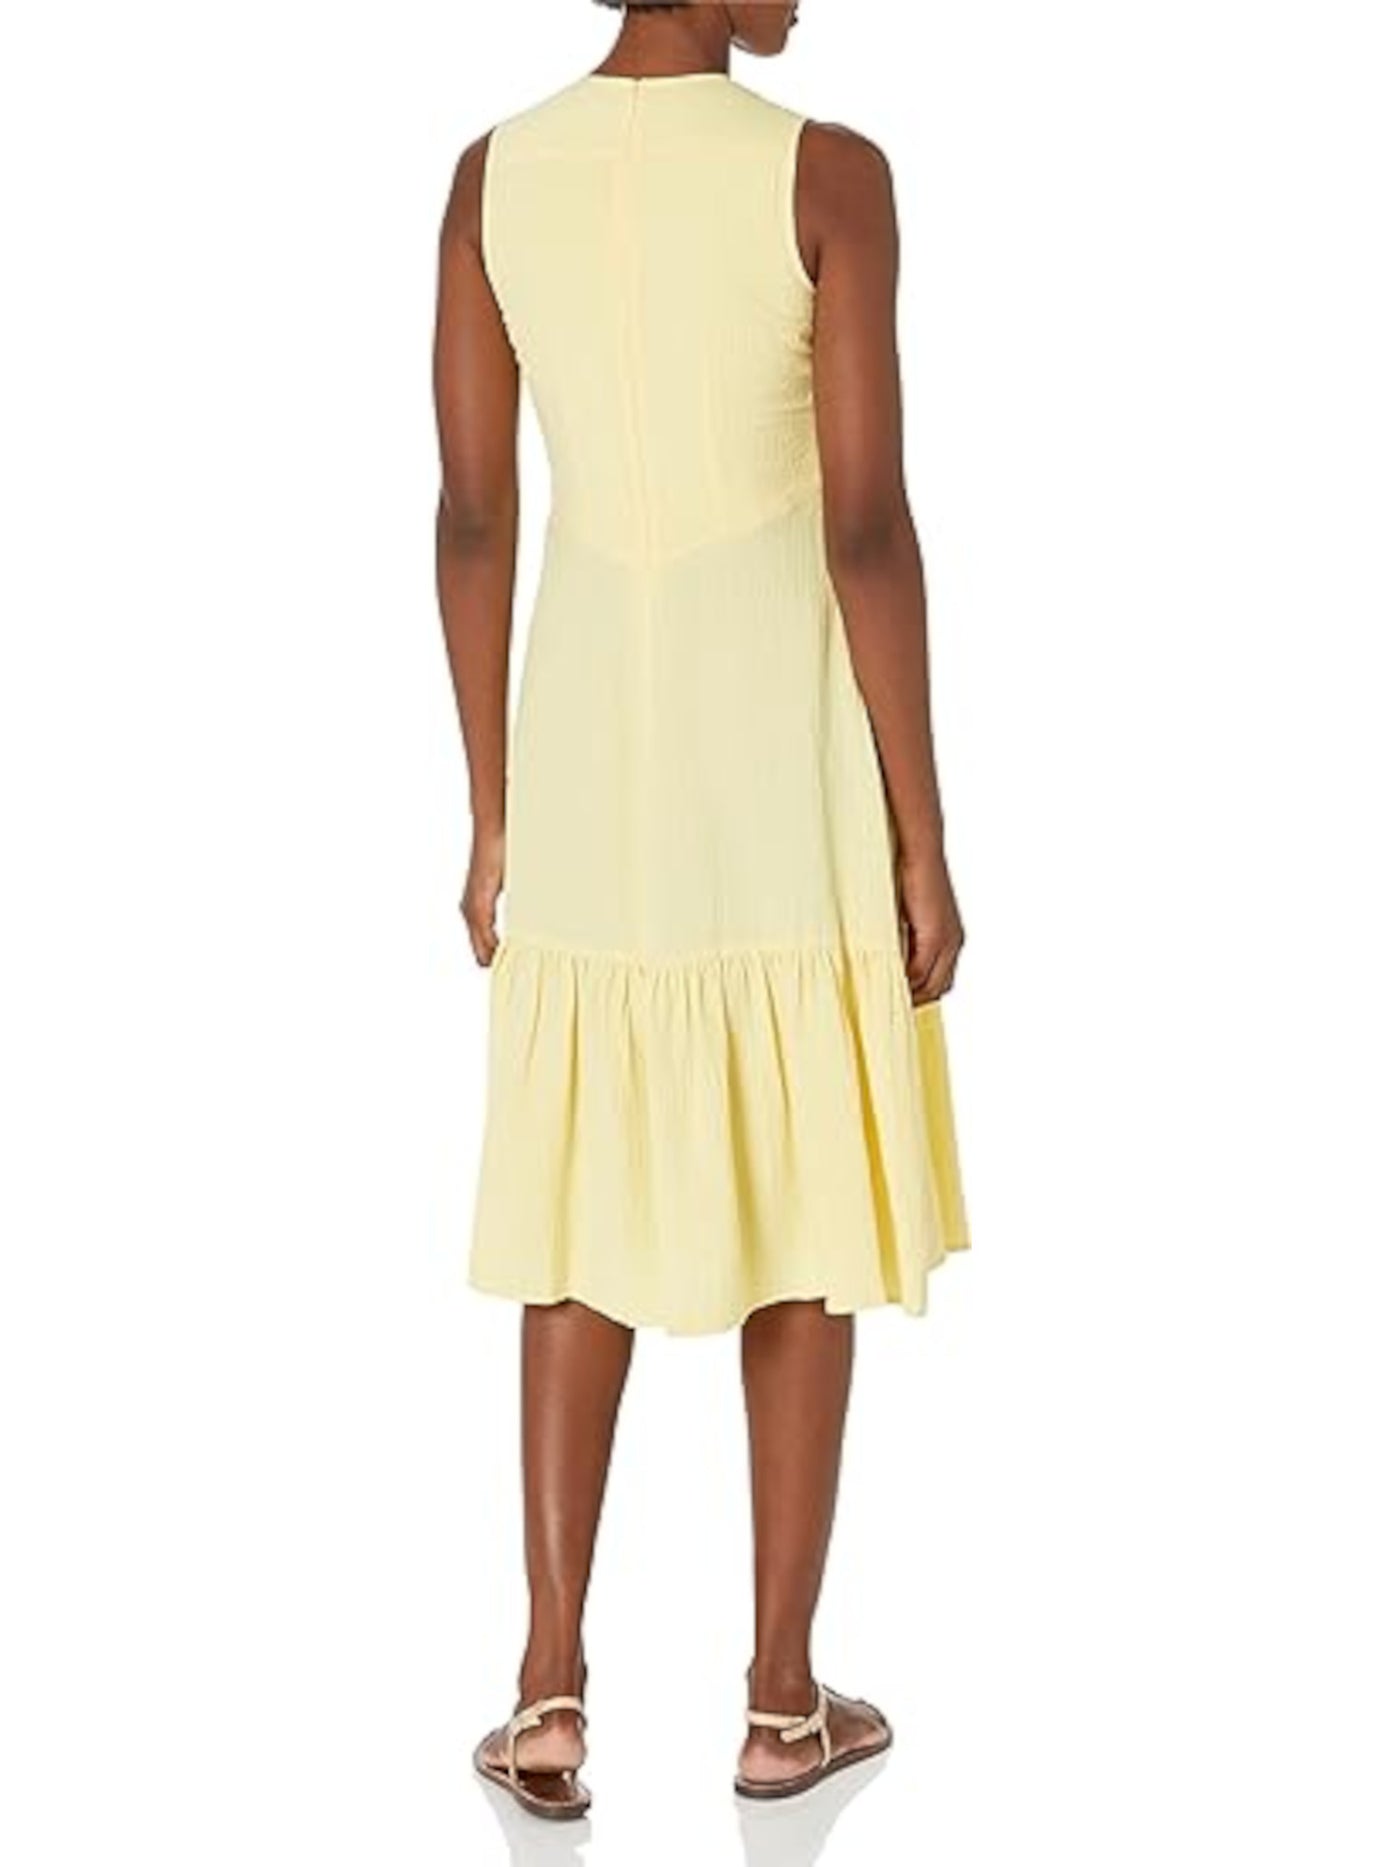 CALVIN KLEIN Womens Yellow Zippered Ruched Unlined Sleeveless V Neck Below The Knee Fit + Flare Dress 10